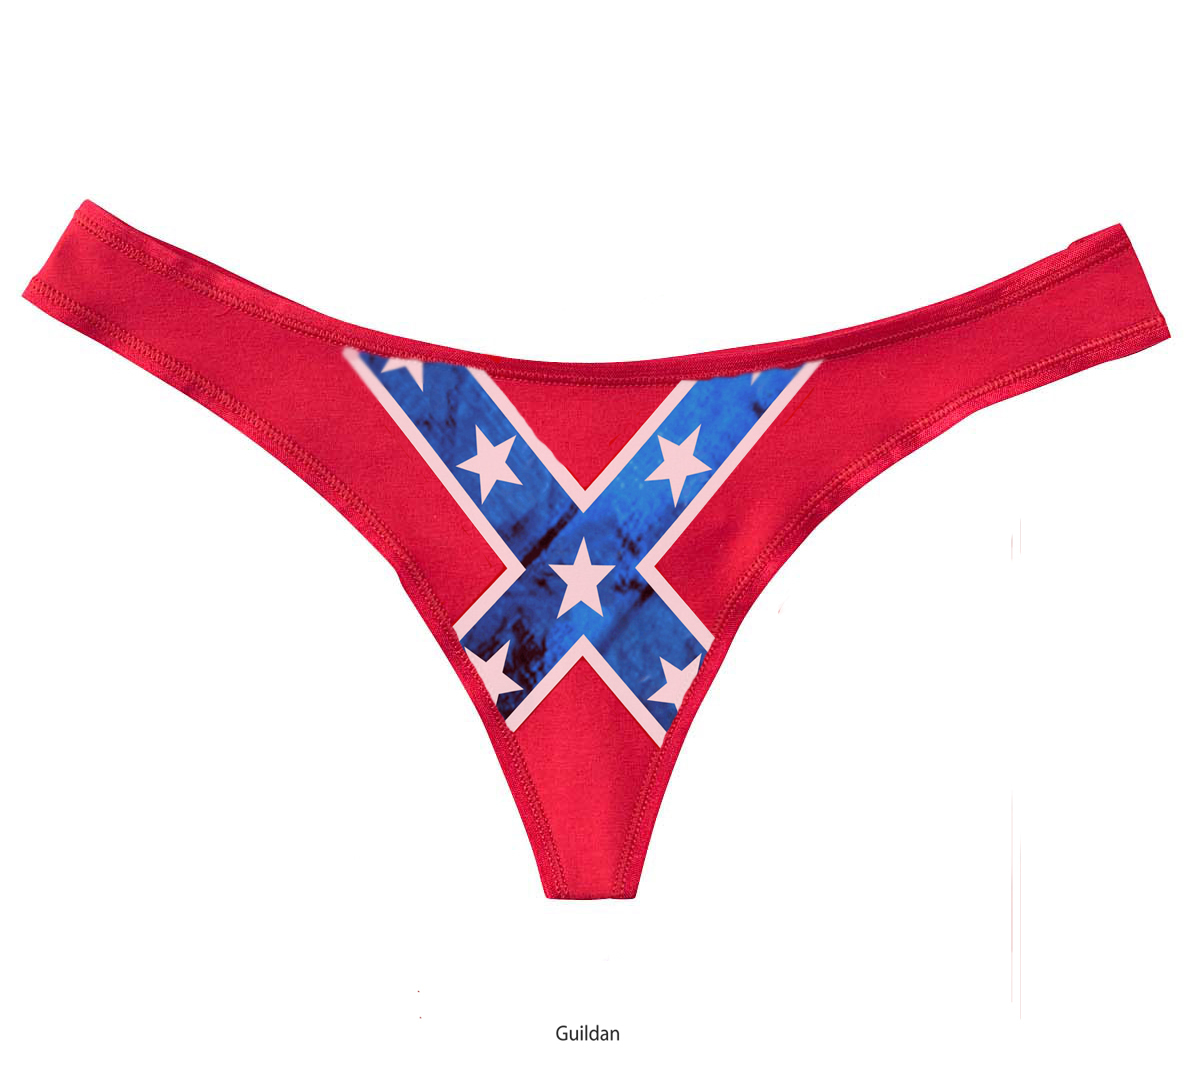 Rebel Flag Products Confederate Flag Items Dixie Redneck